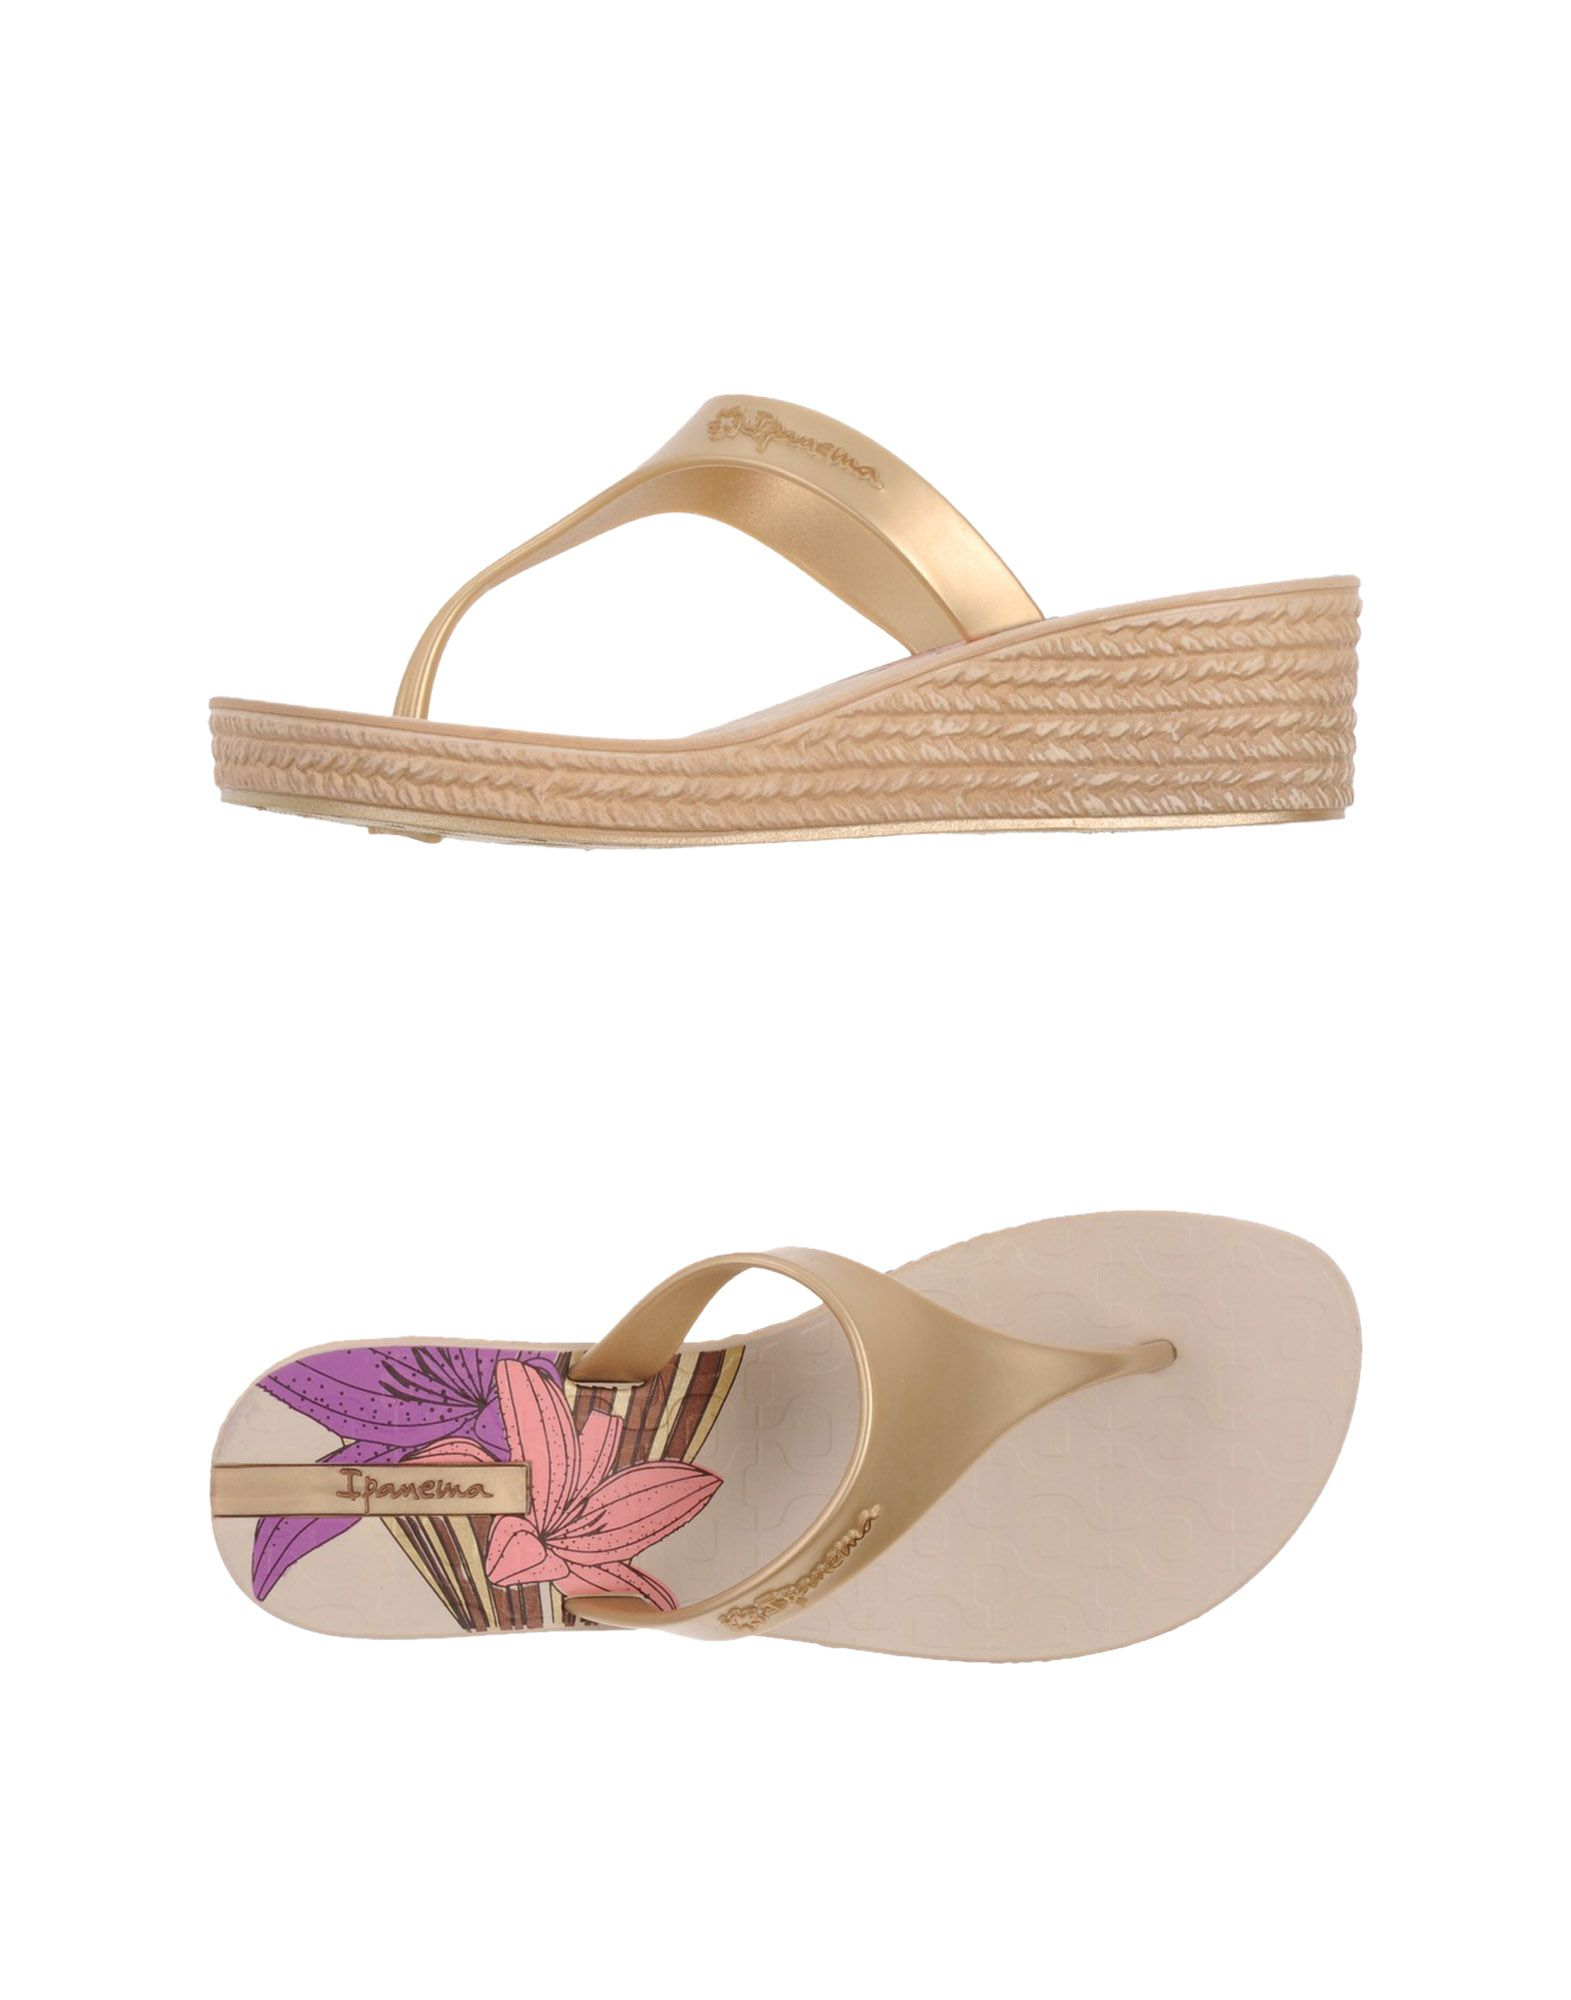  Ipanema  Thong Sandal  in Gold Save 20 Lyst